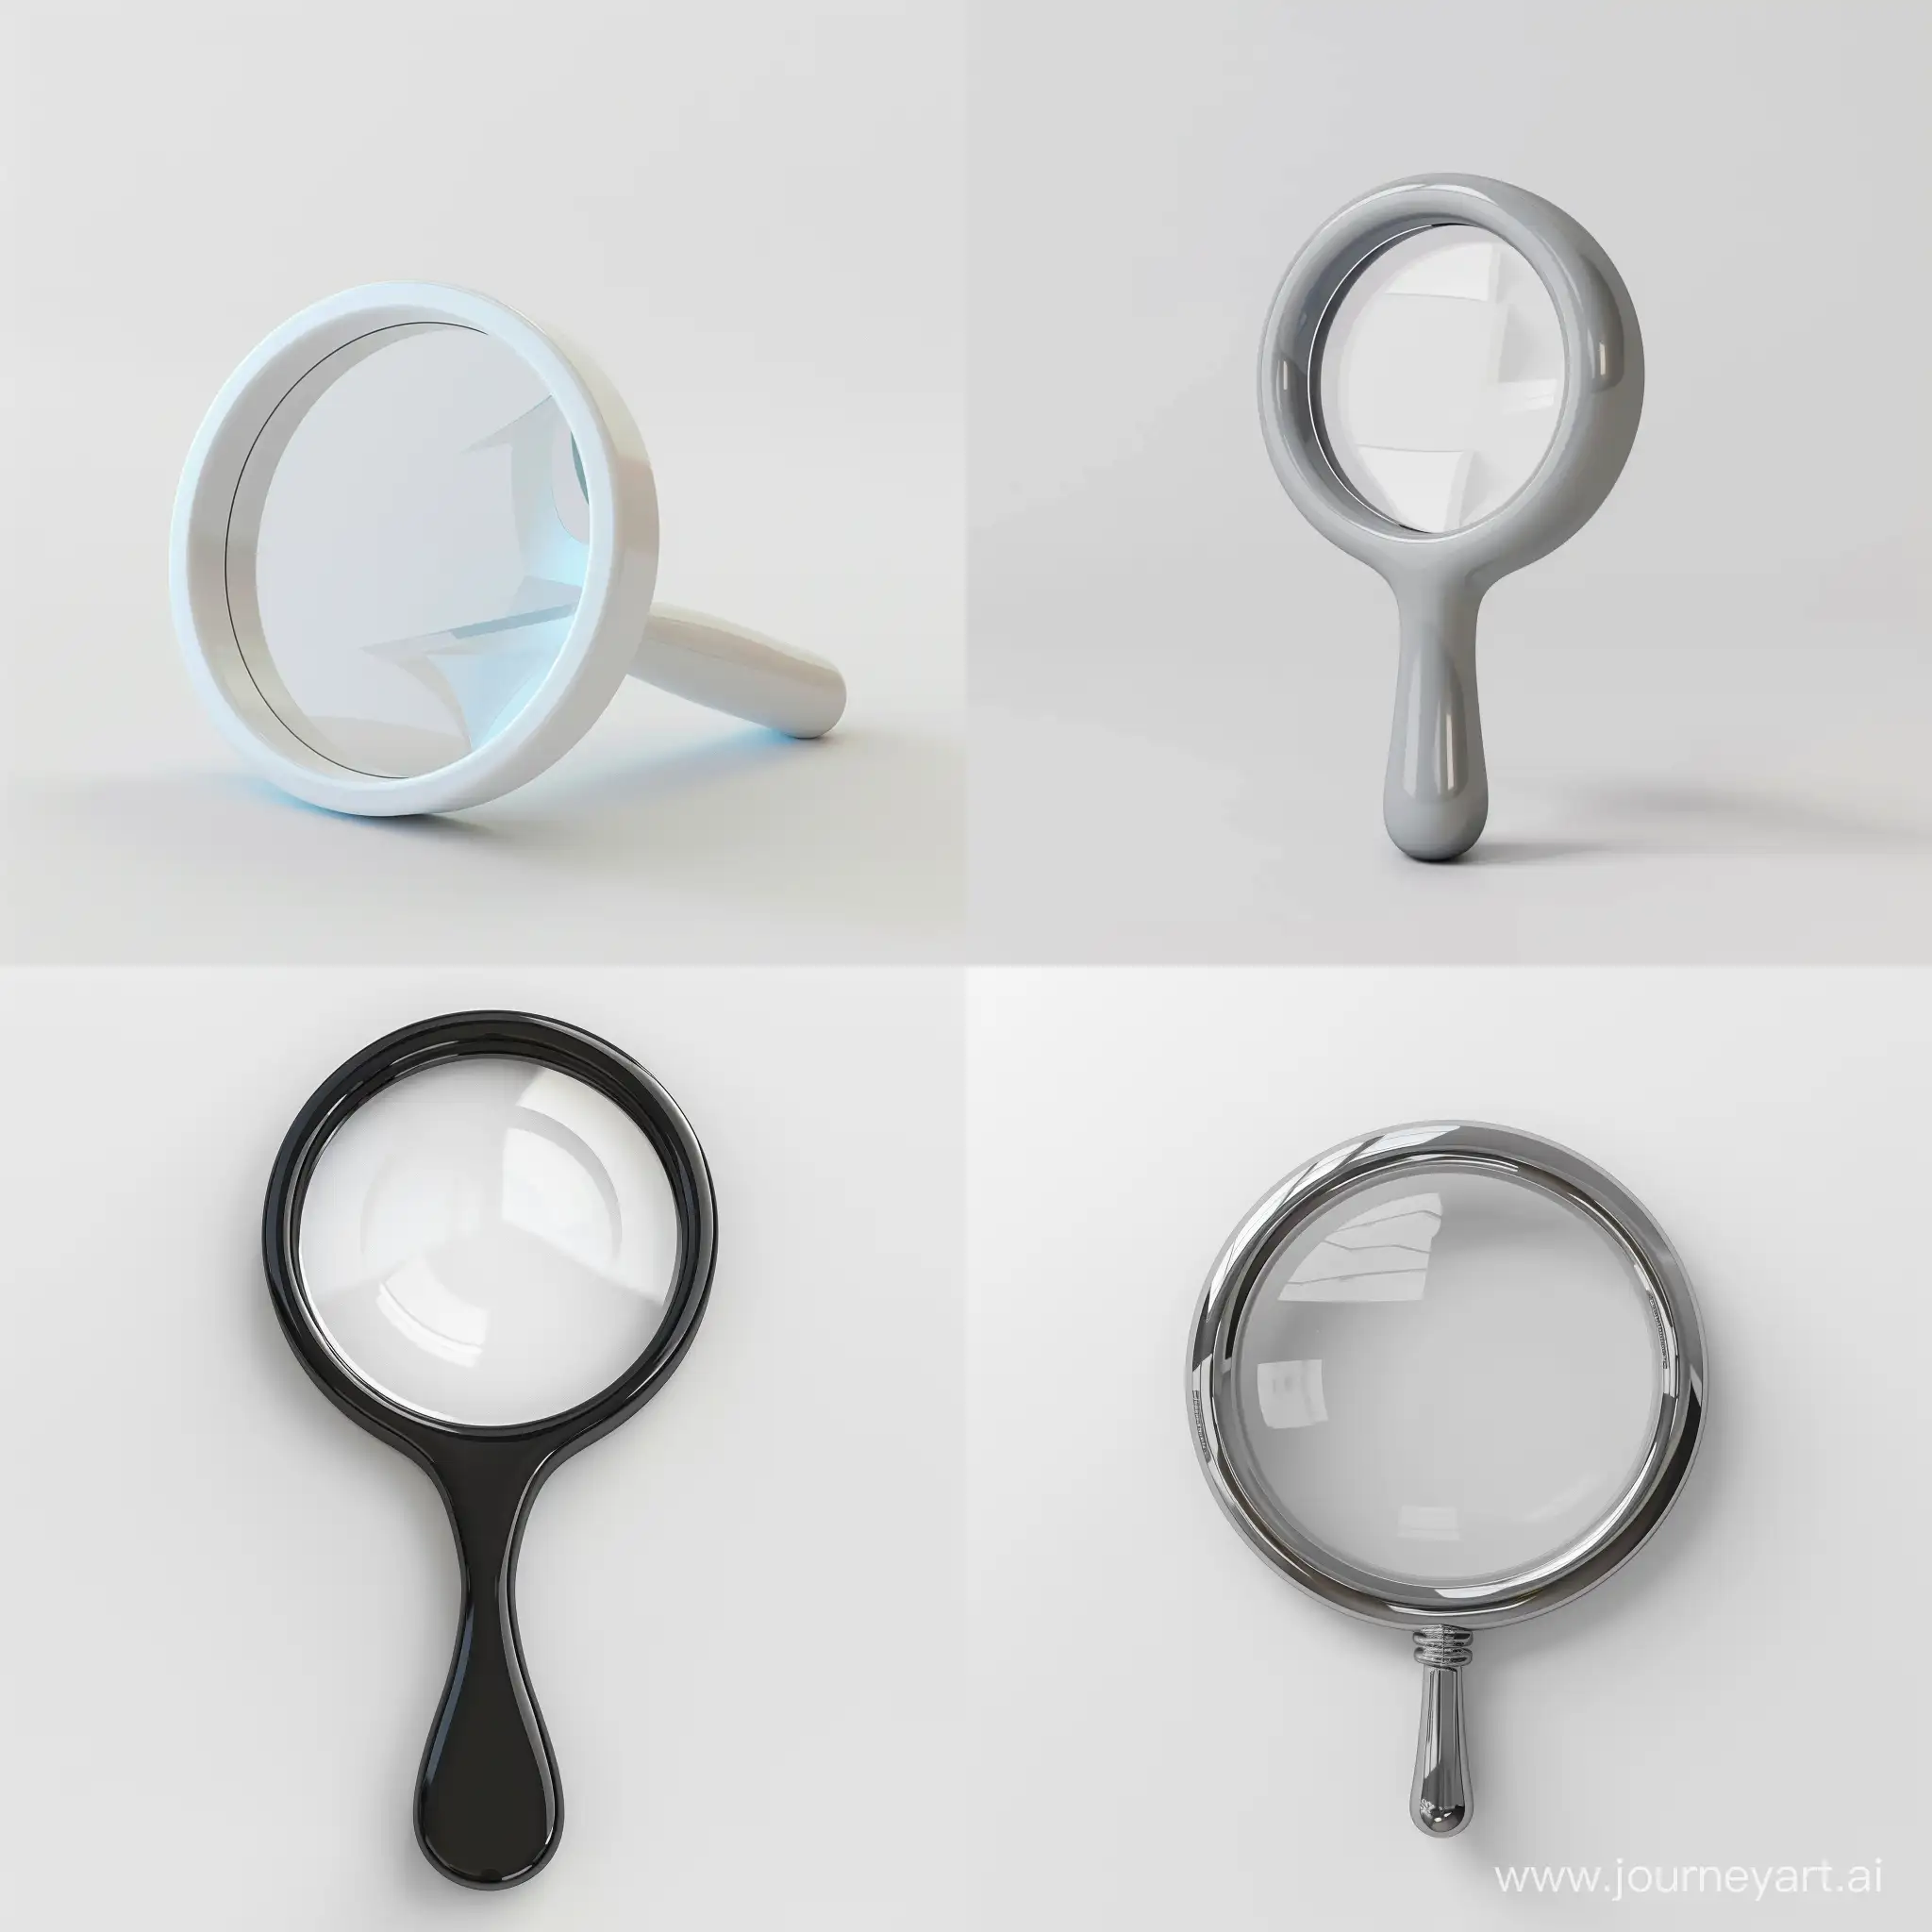 Minimalistic-Plastic-Magnifier-Side-View-on-White-Background